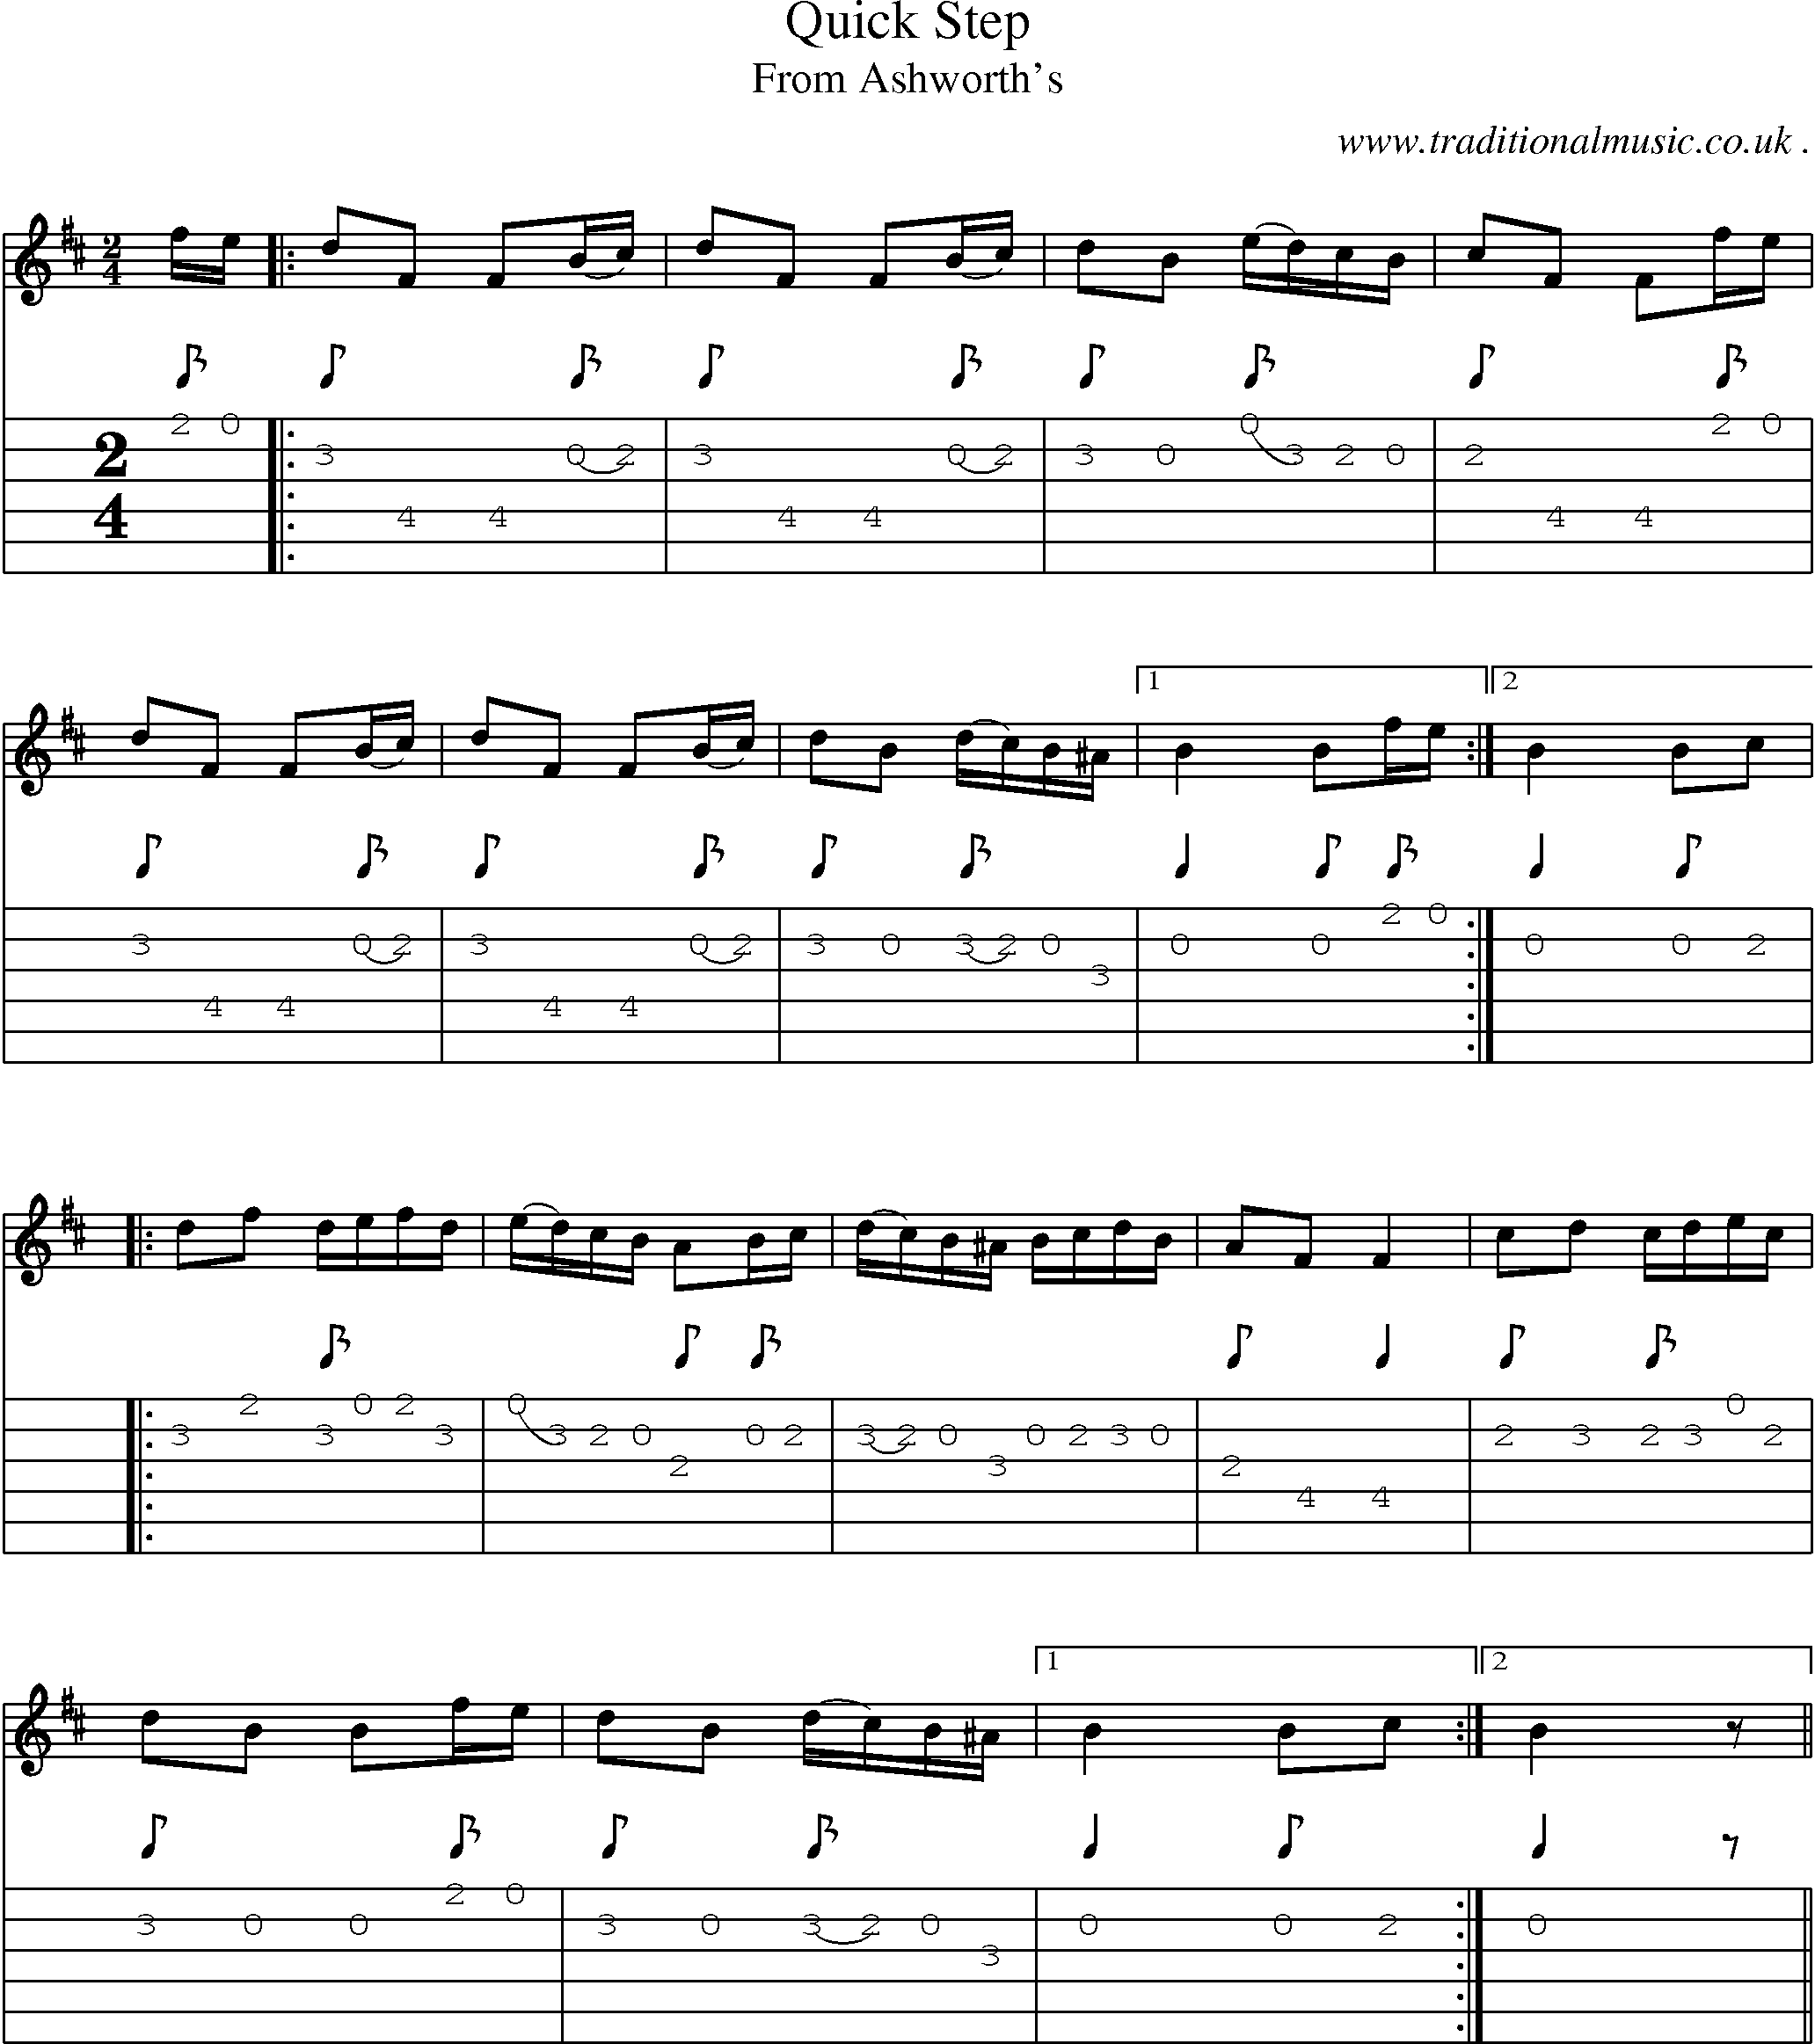 Music Score and Guitar Tabs for Quick Step